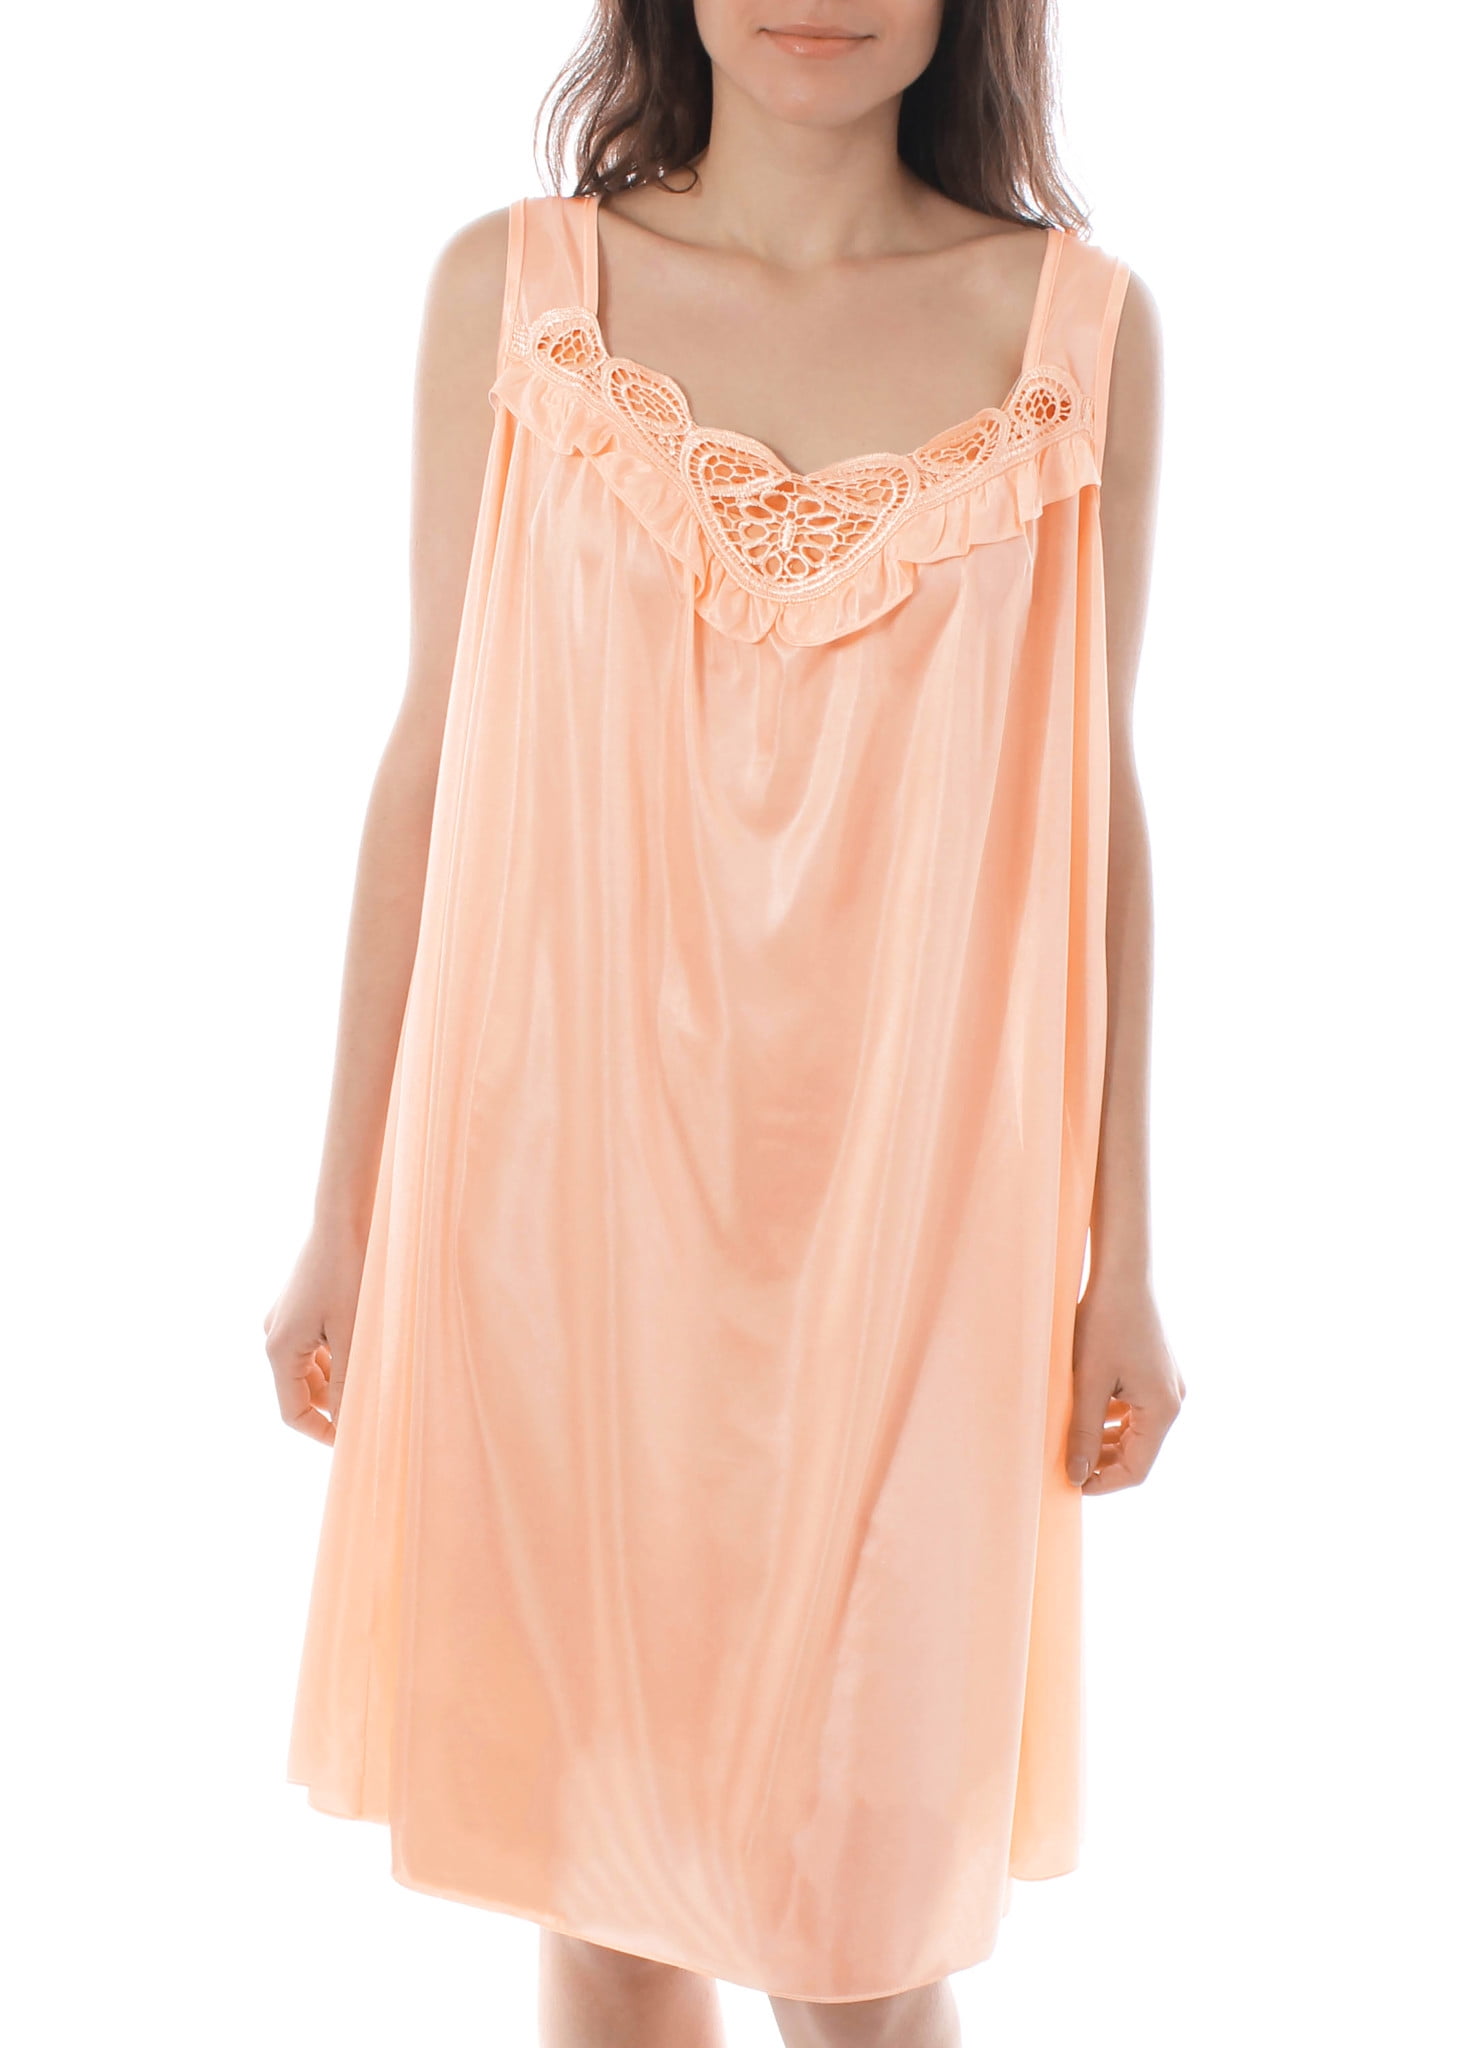 Venice Womens' Silky Looking Embroidered Nightgown 06 X-Large Peach